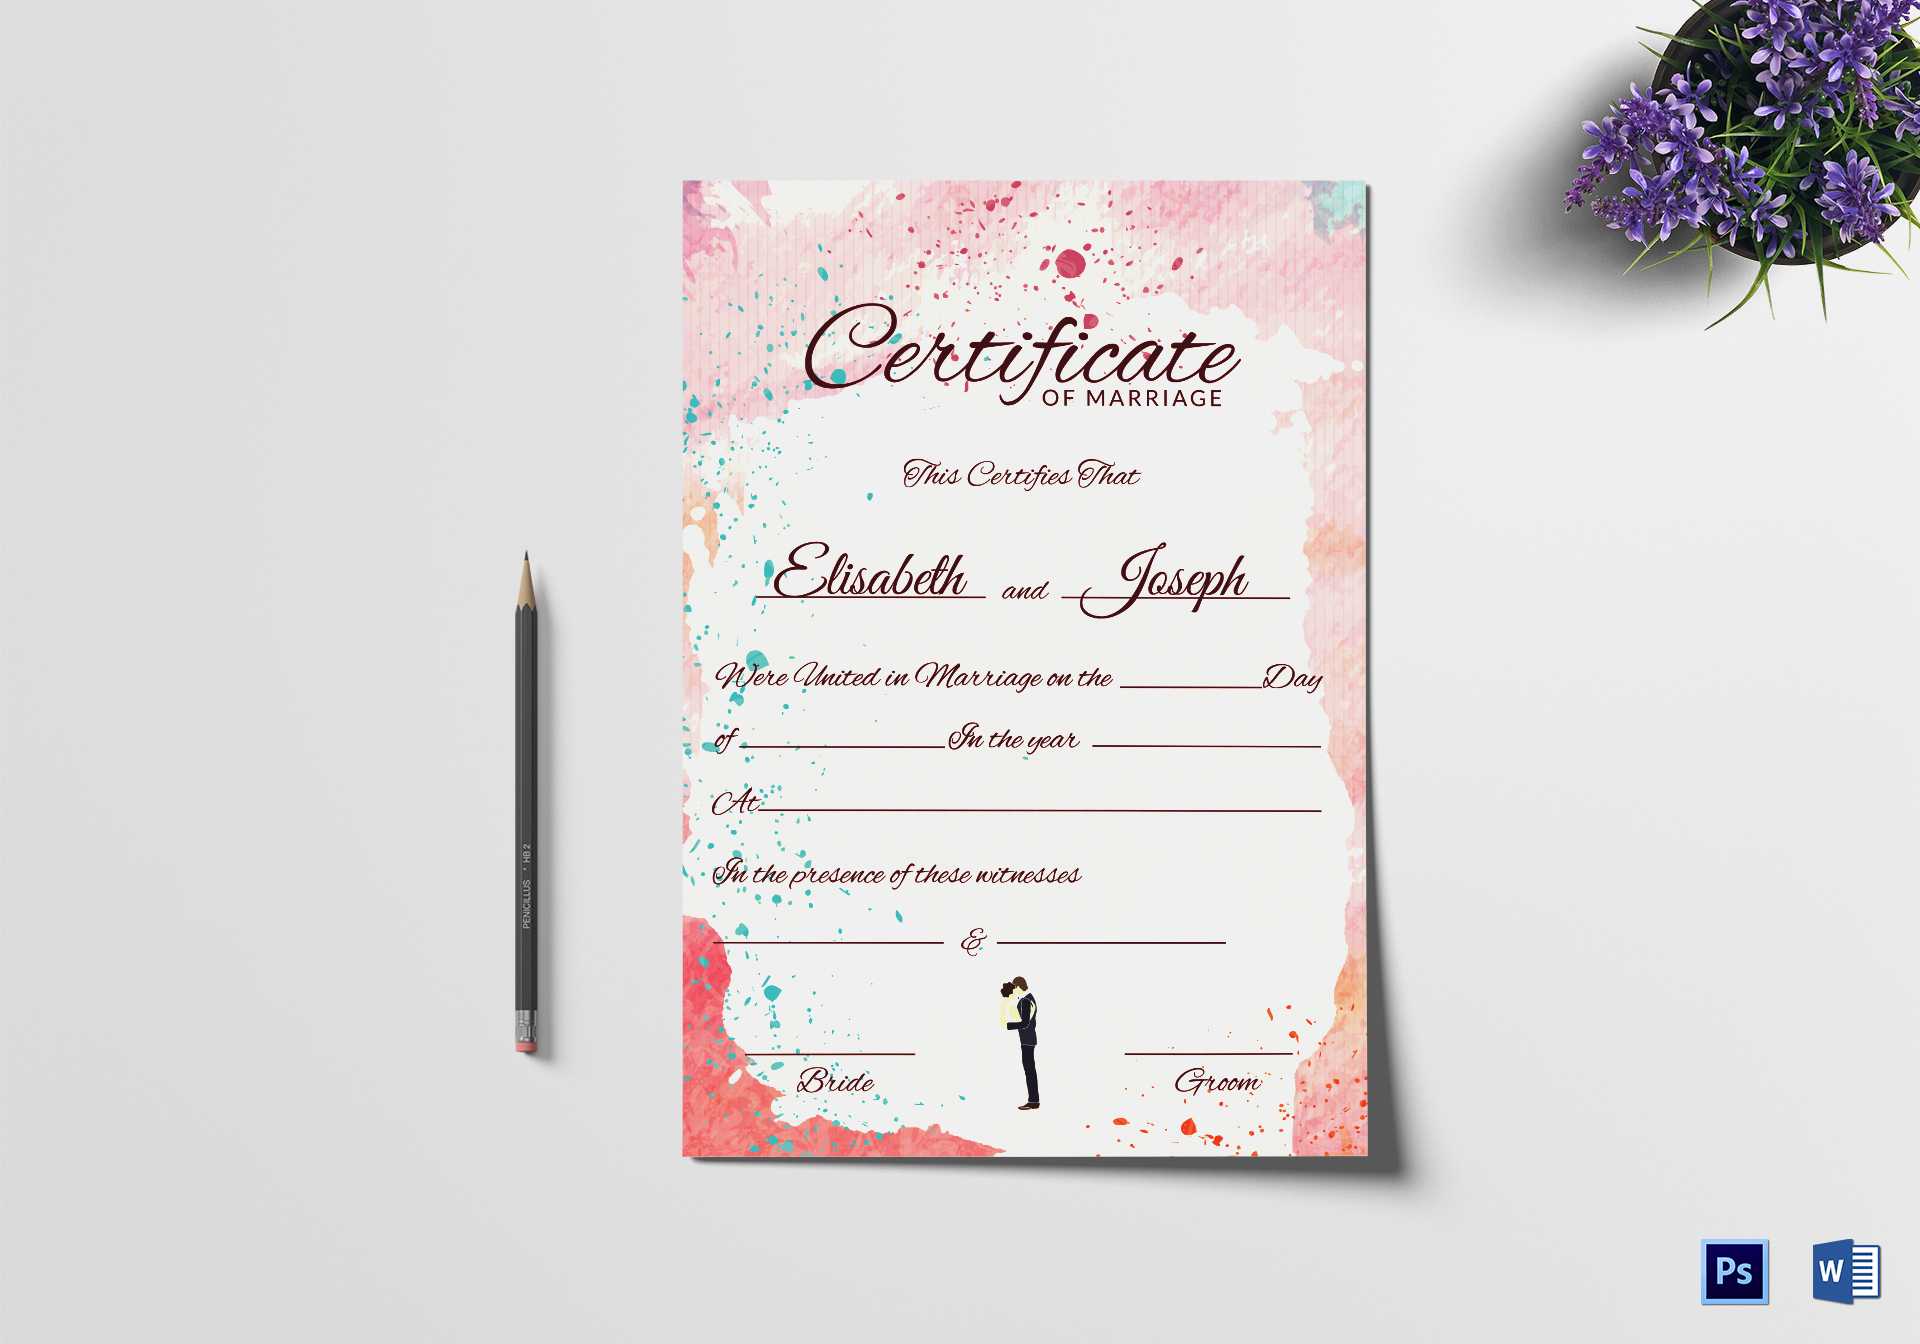 Christian Marriage Certificate Template With Regard To Christian Certificate Template